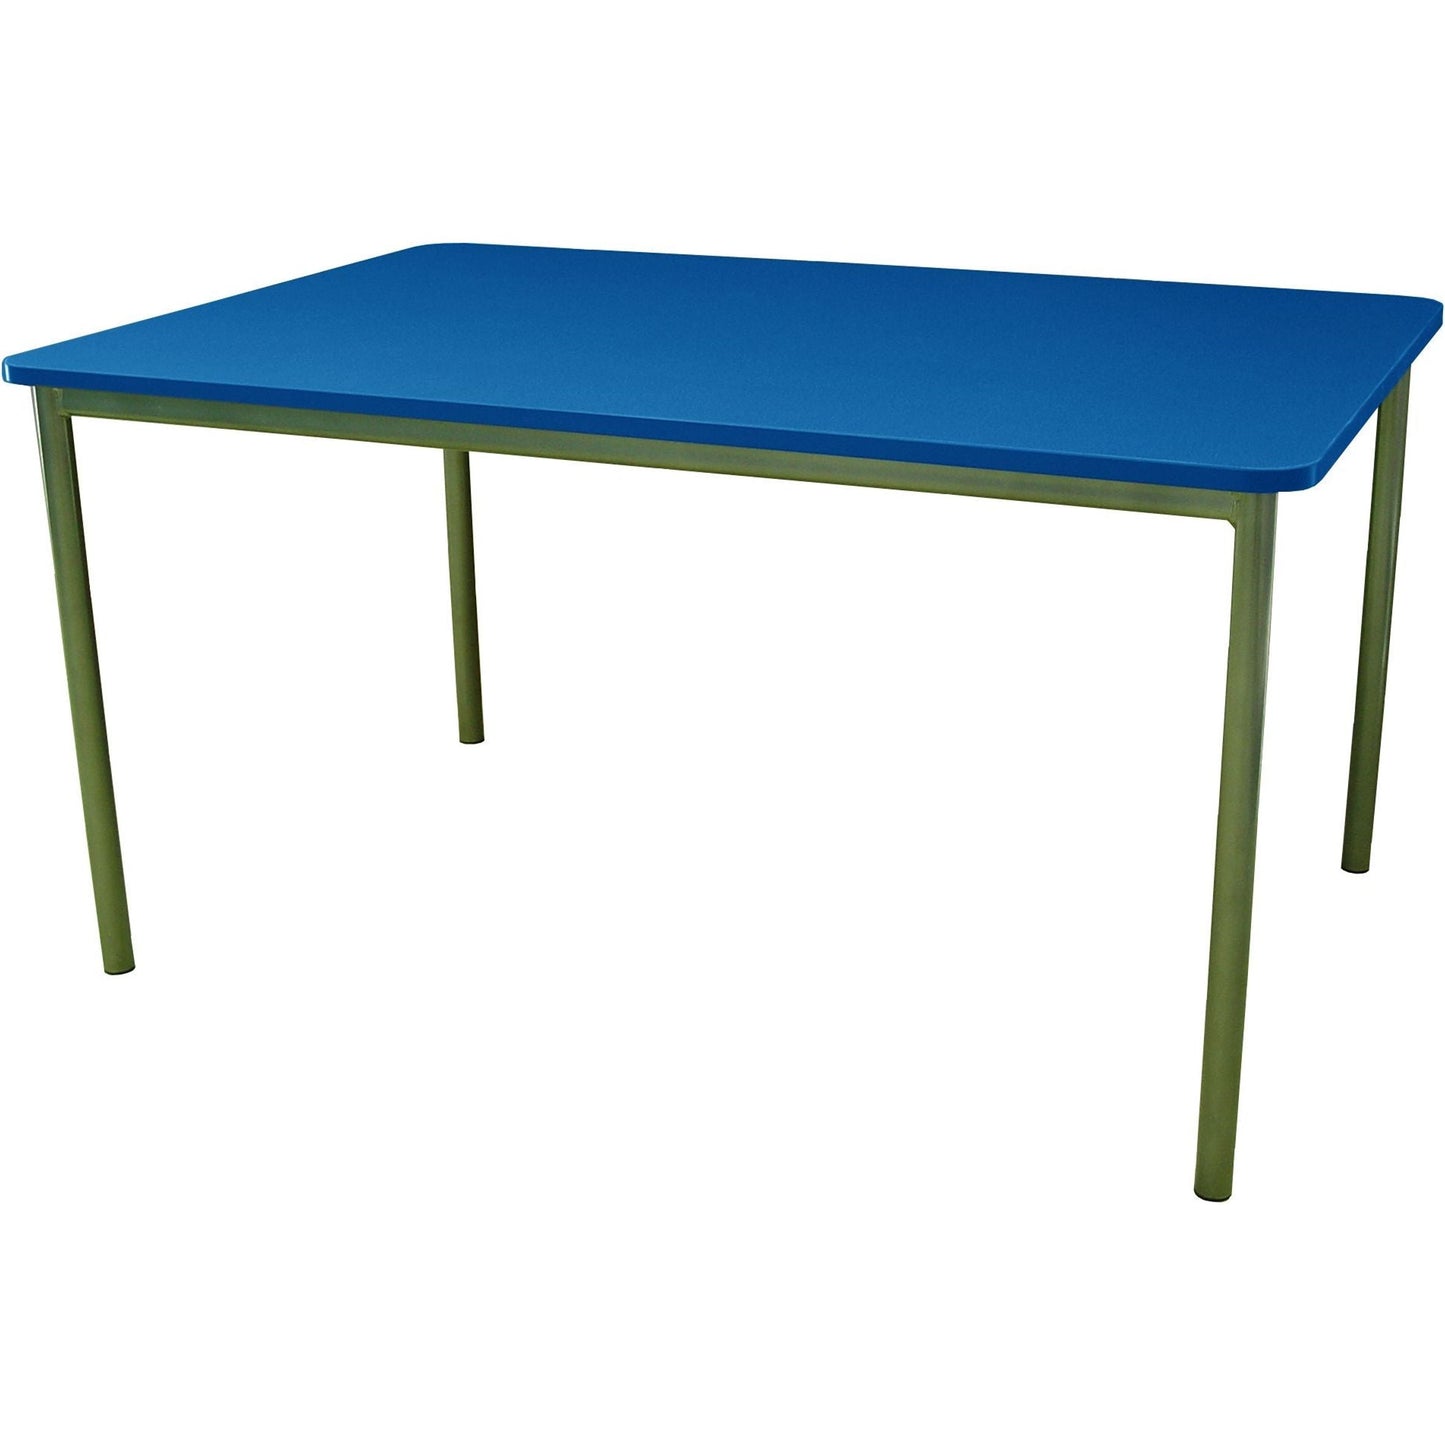 Deluxe Table 1200 x 600